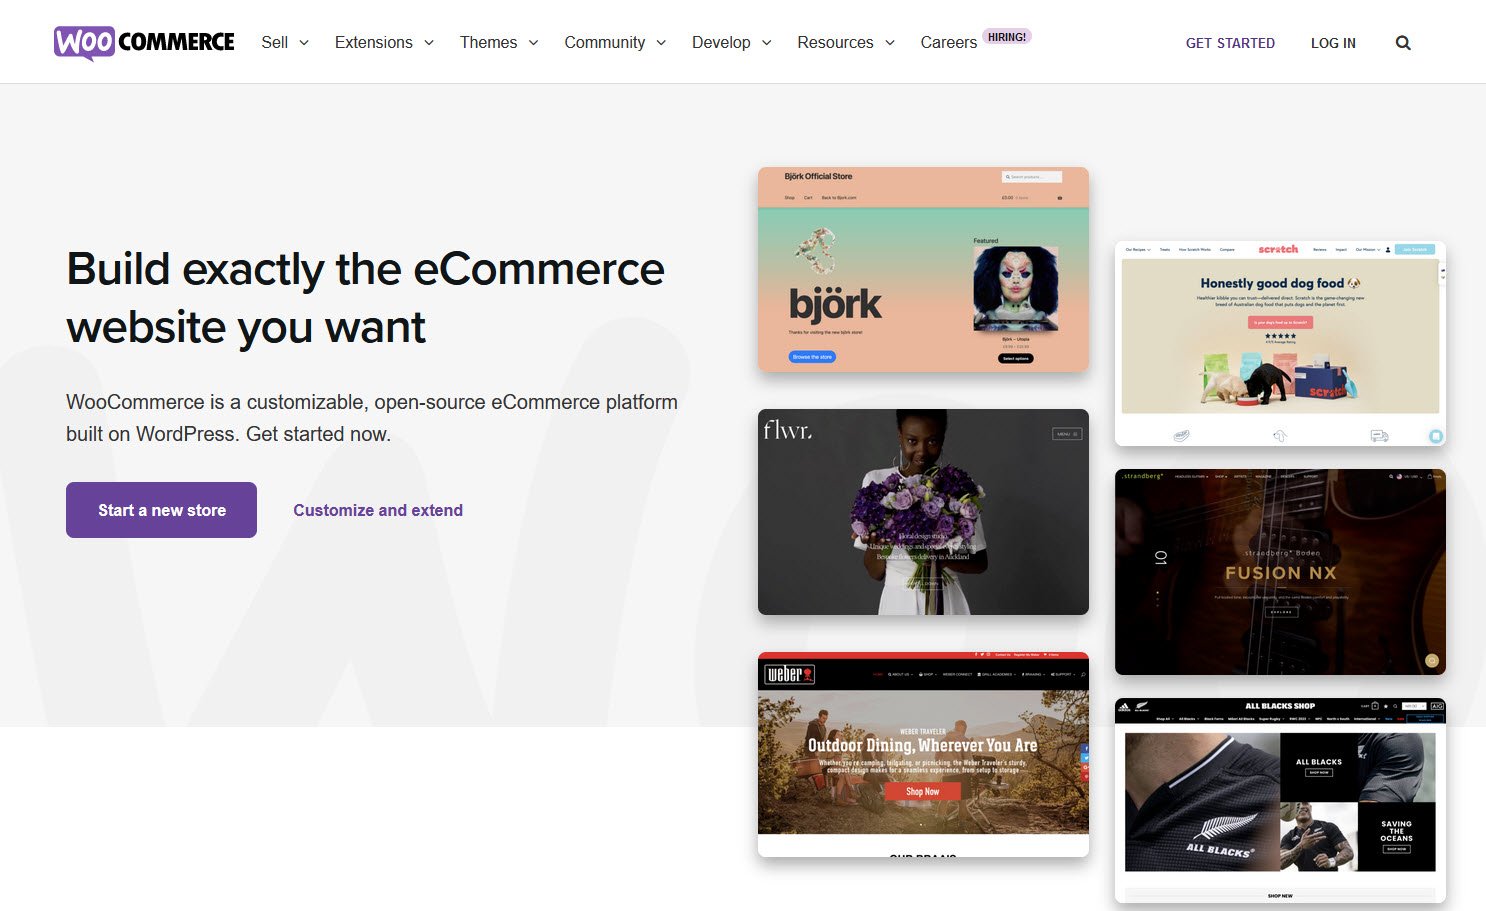 woocommerce e-commerce platforms topattop